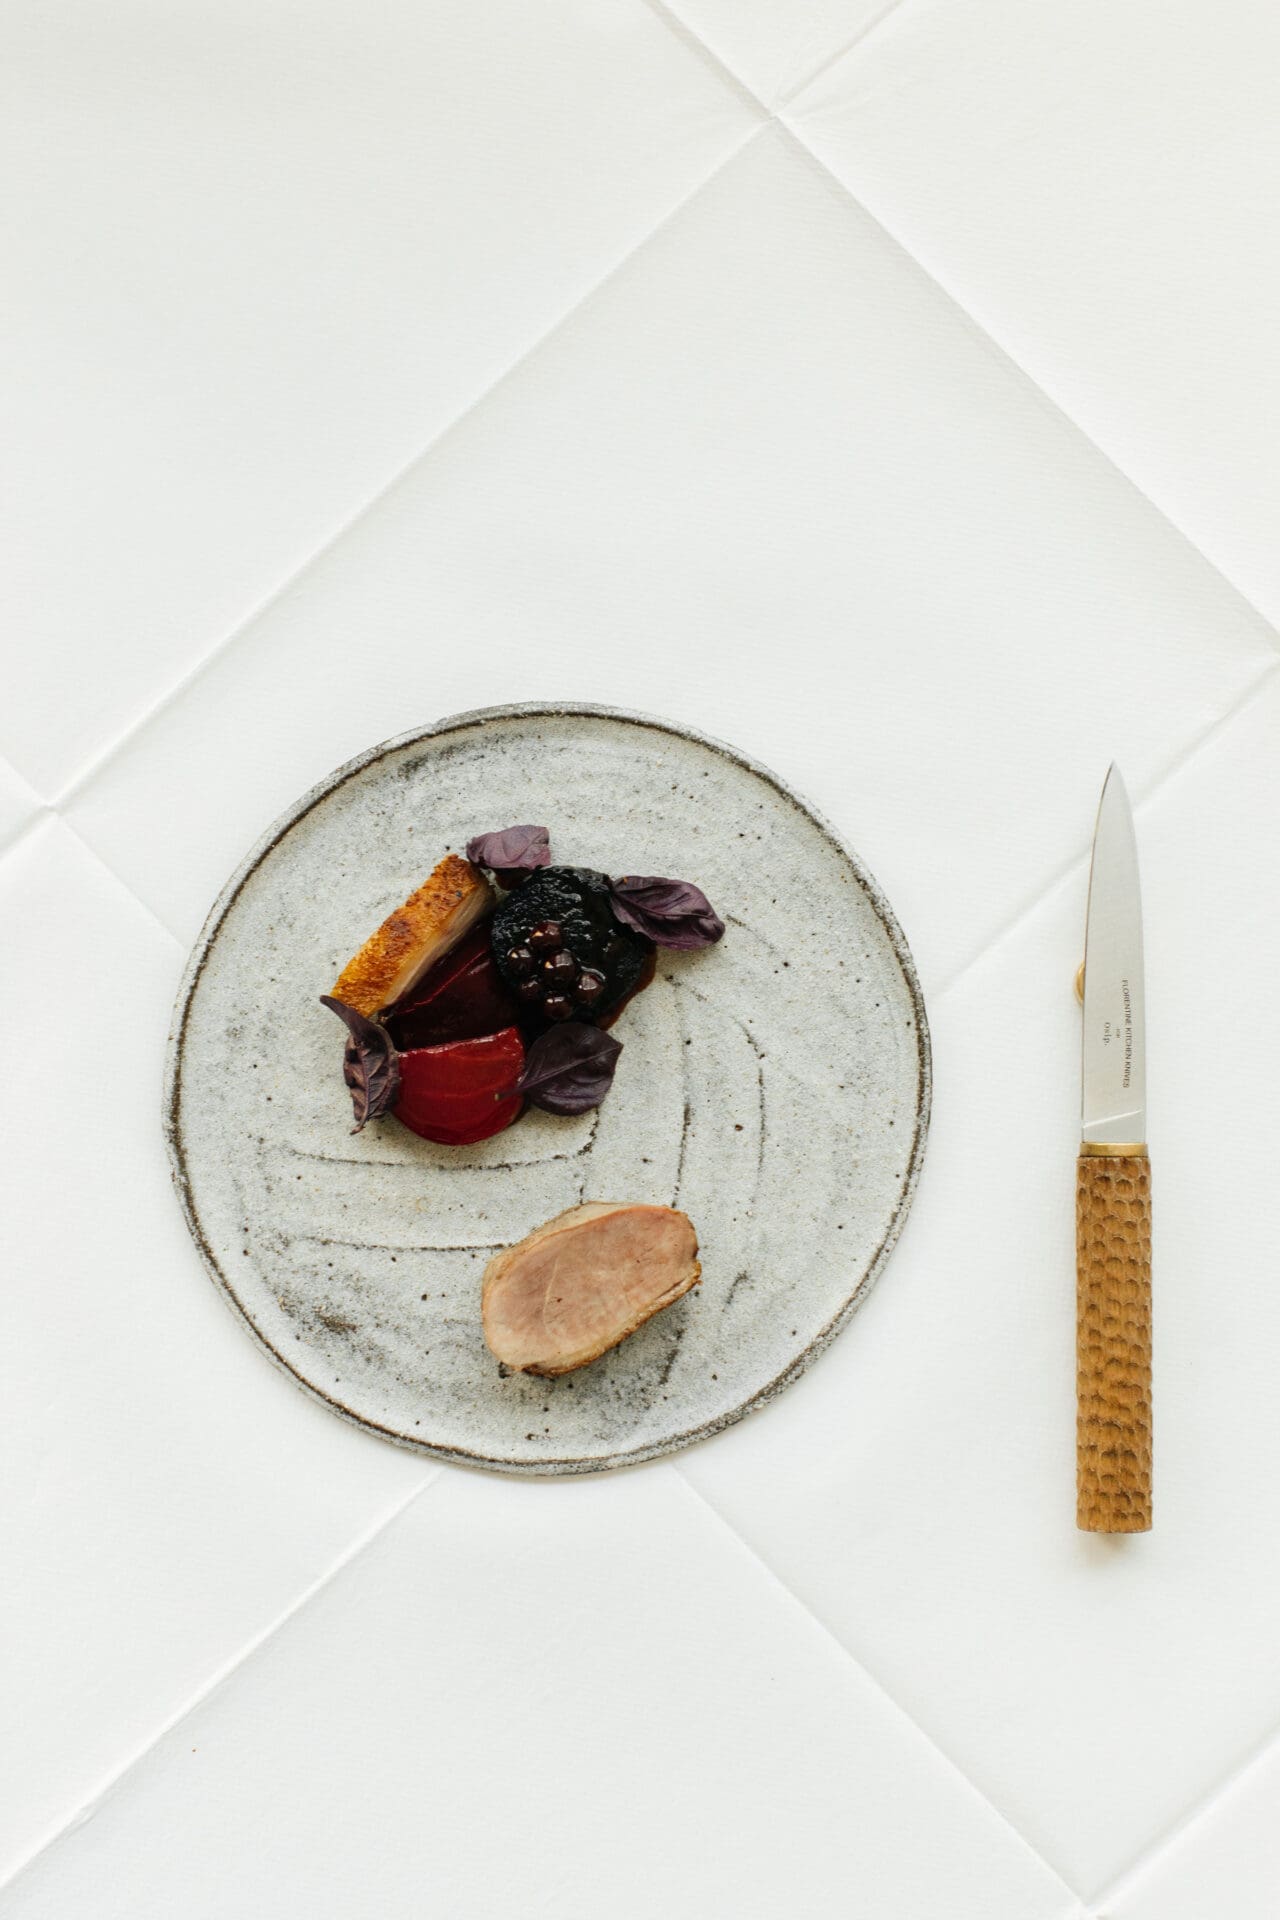 The best restaurants in Bruton | a dish as Osip on a ceramic plate against a white backdrop